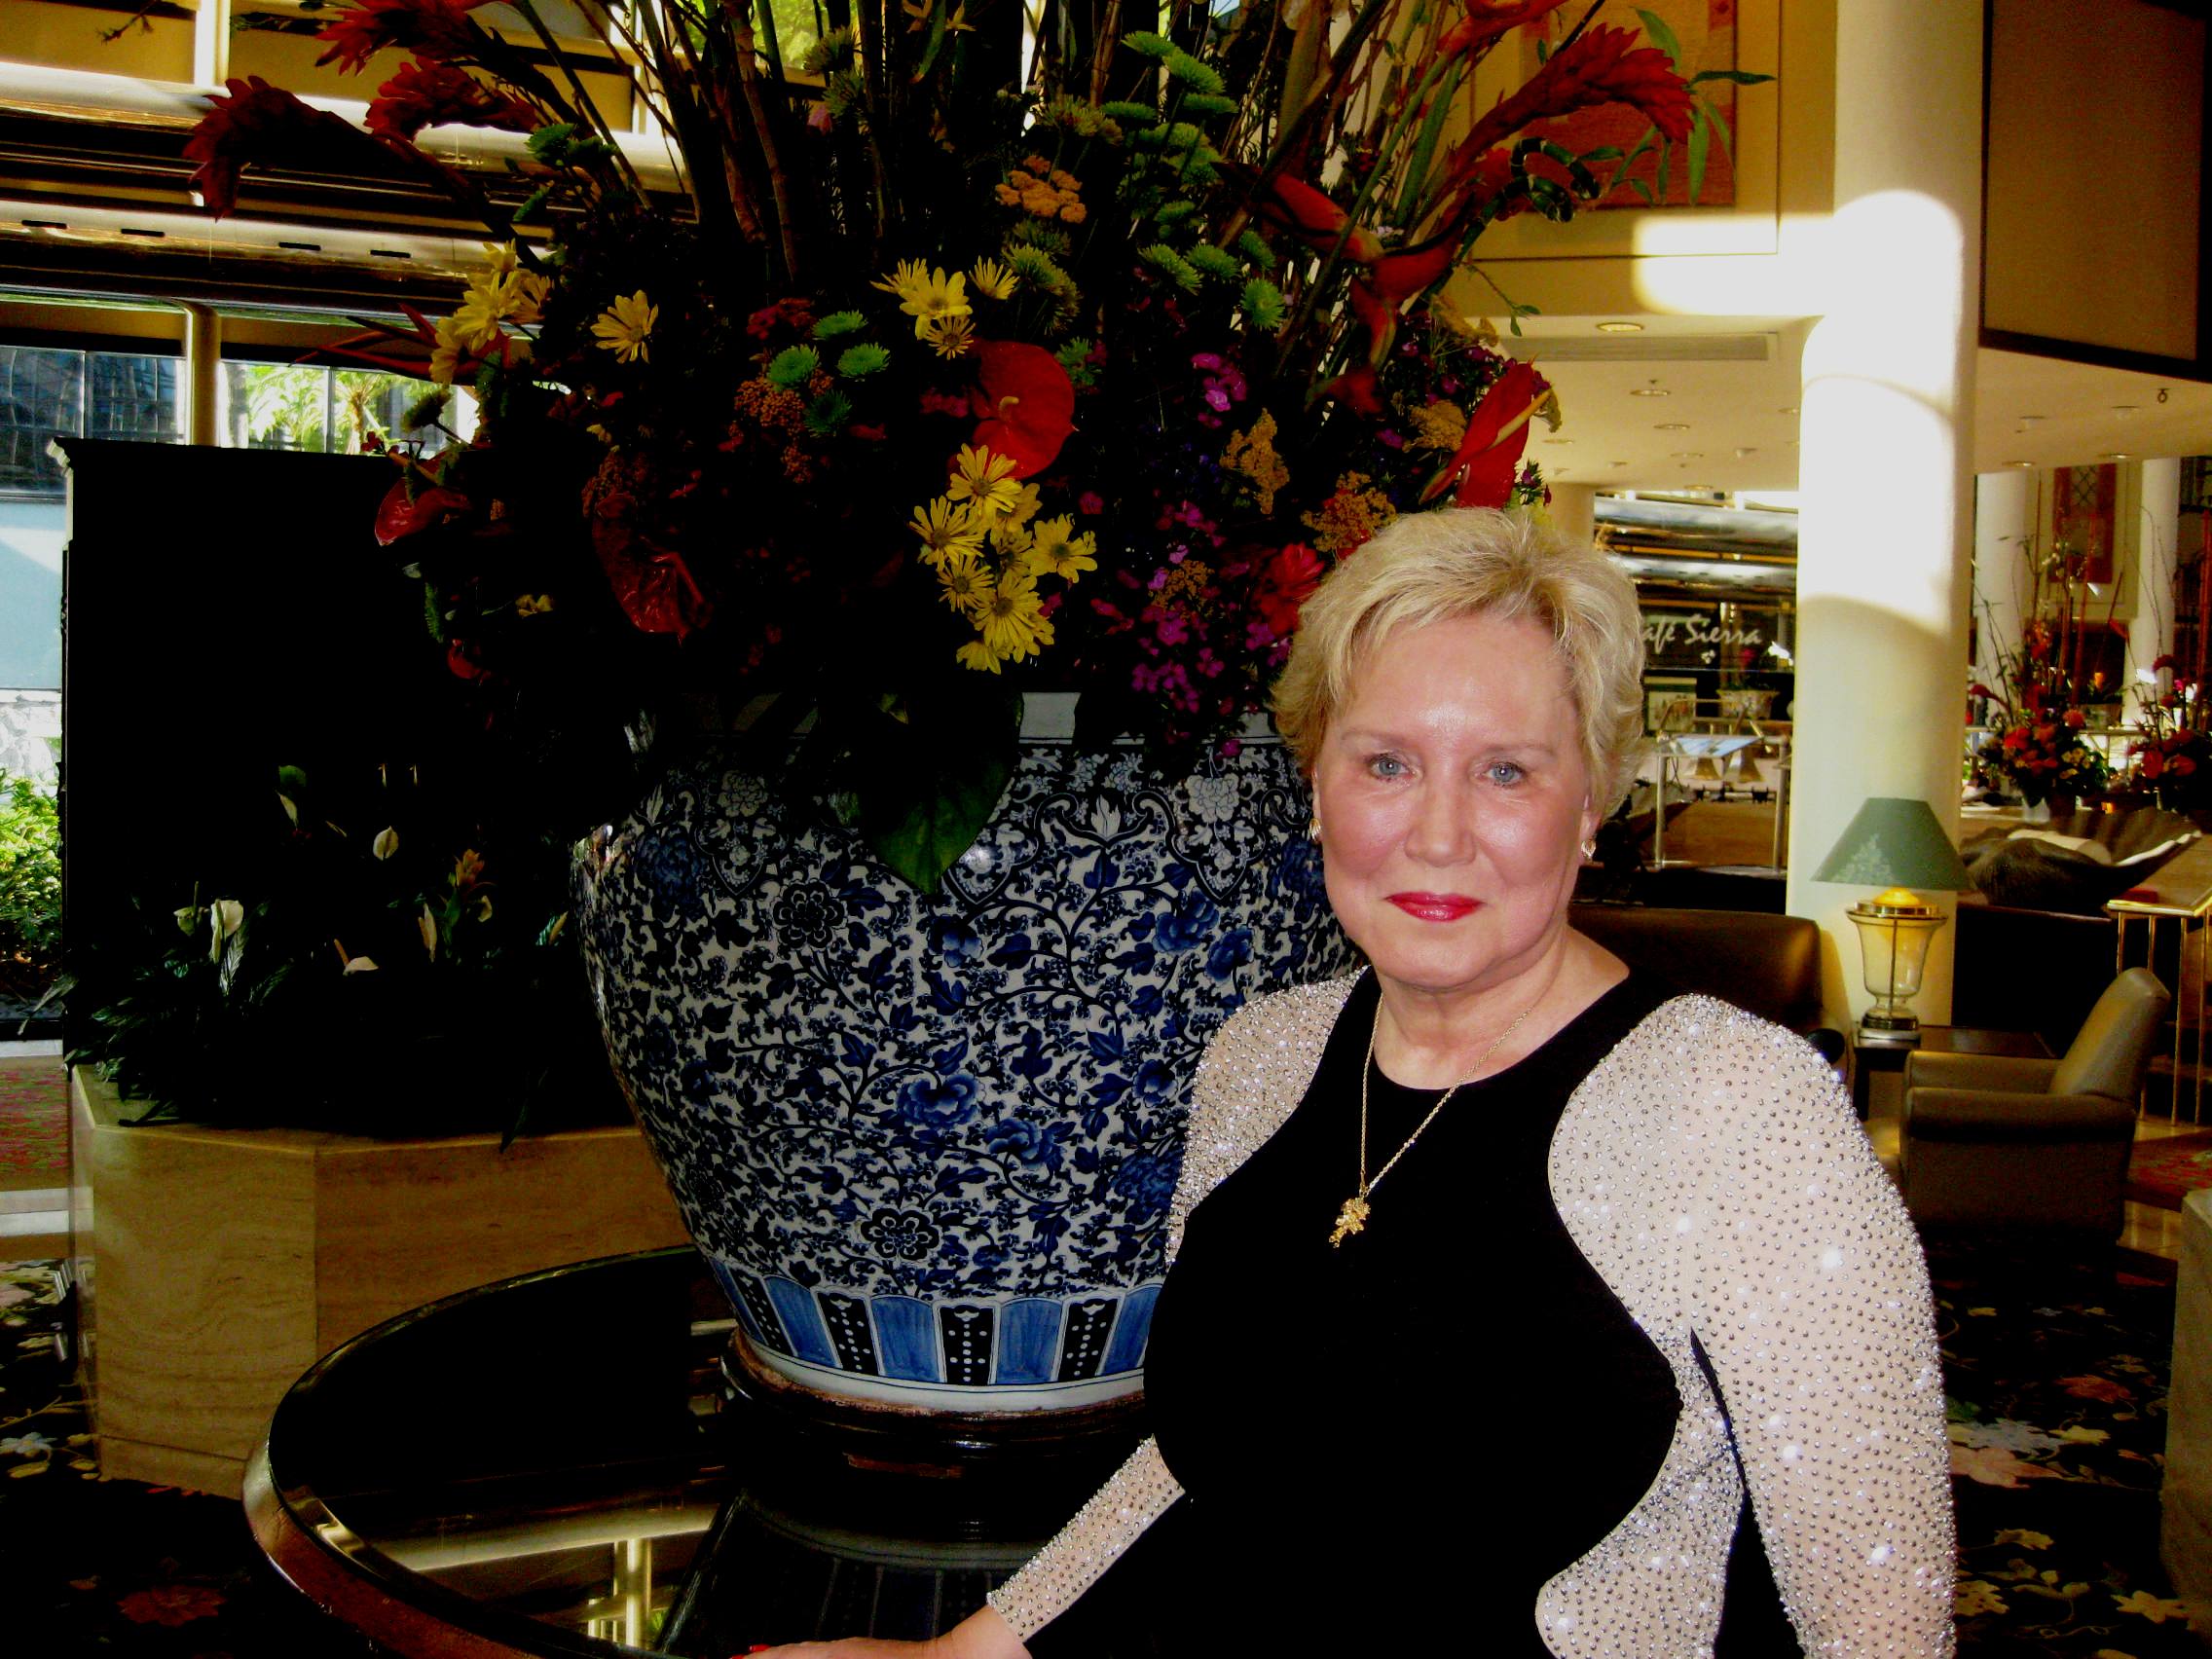 In Hilton Hotel lobby just before the Red Carpet for the Movieguide Awards Gala began, Feb. 6, 2015 in Hollywood.